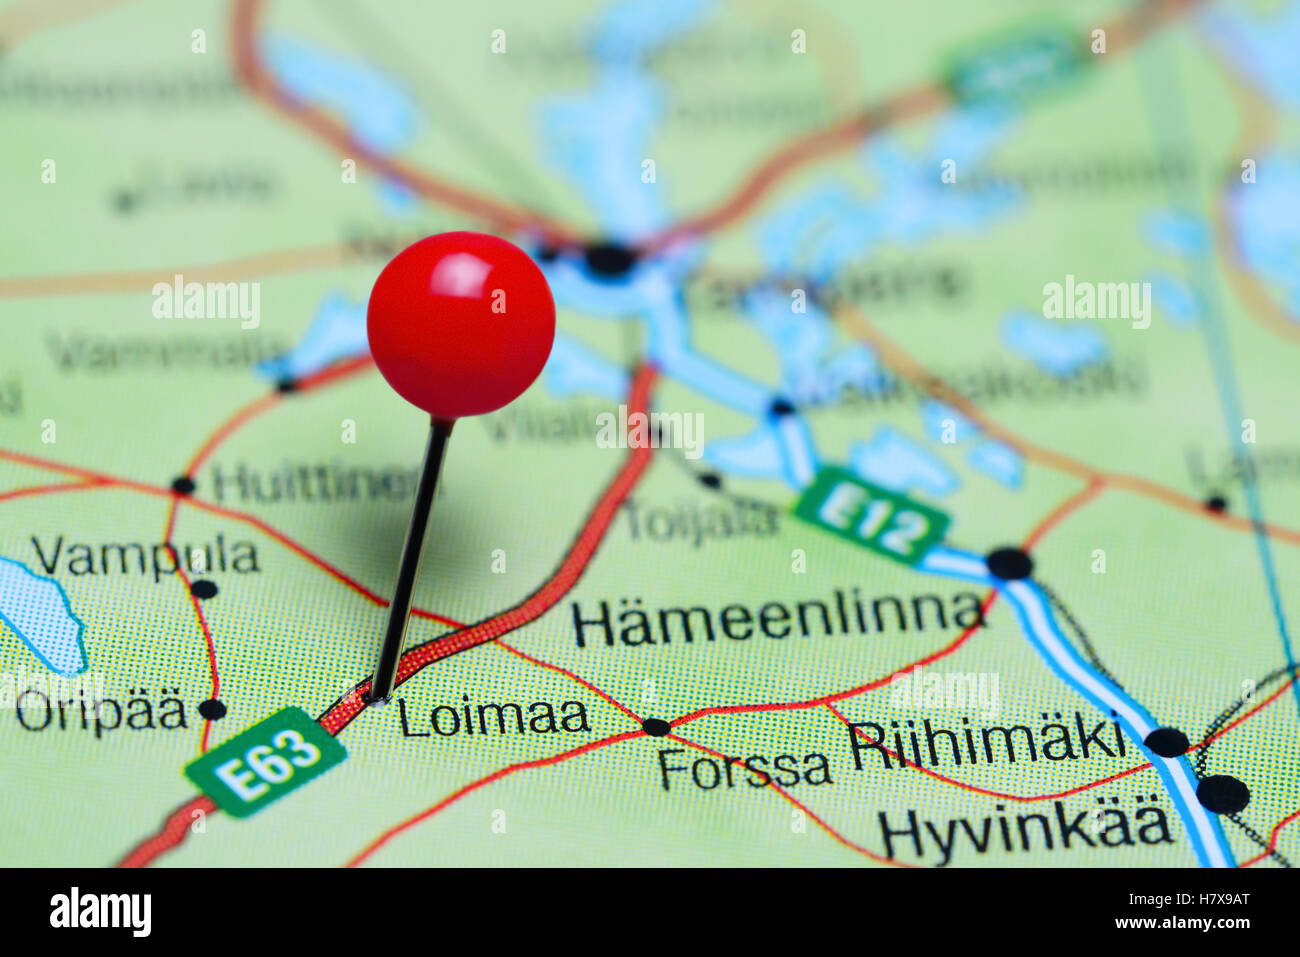 Loimaa pinned on a map of Finland Stock Photo